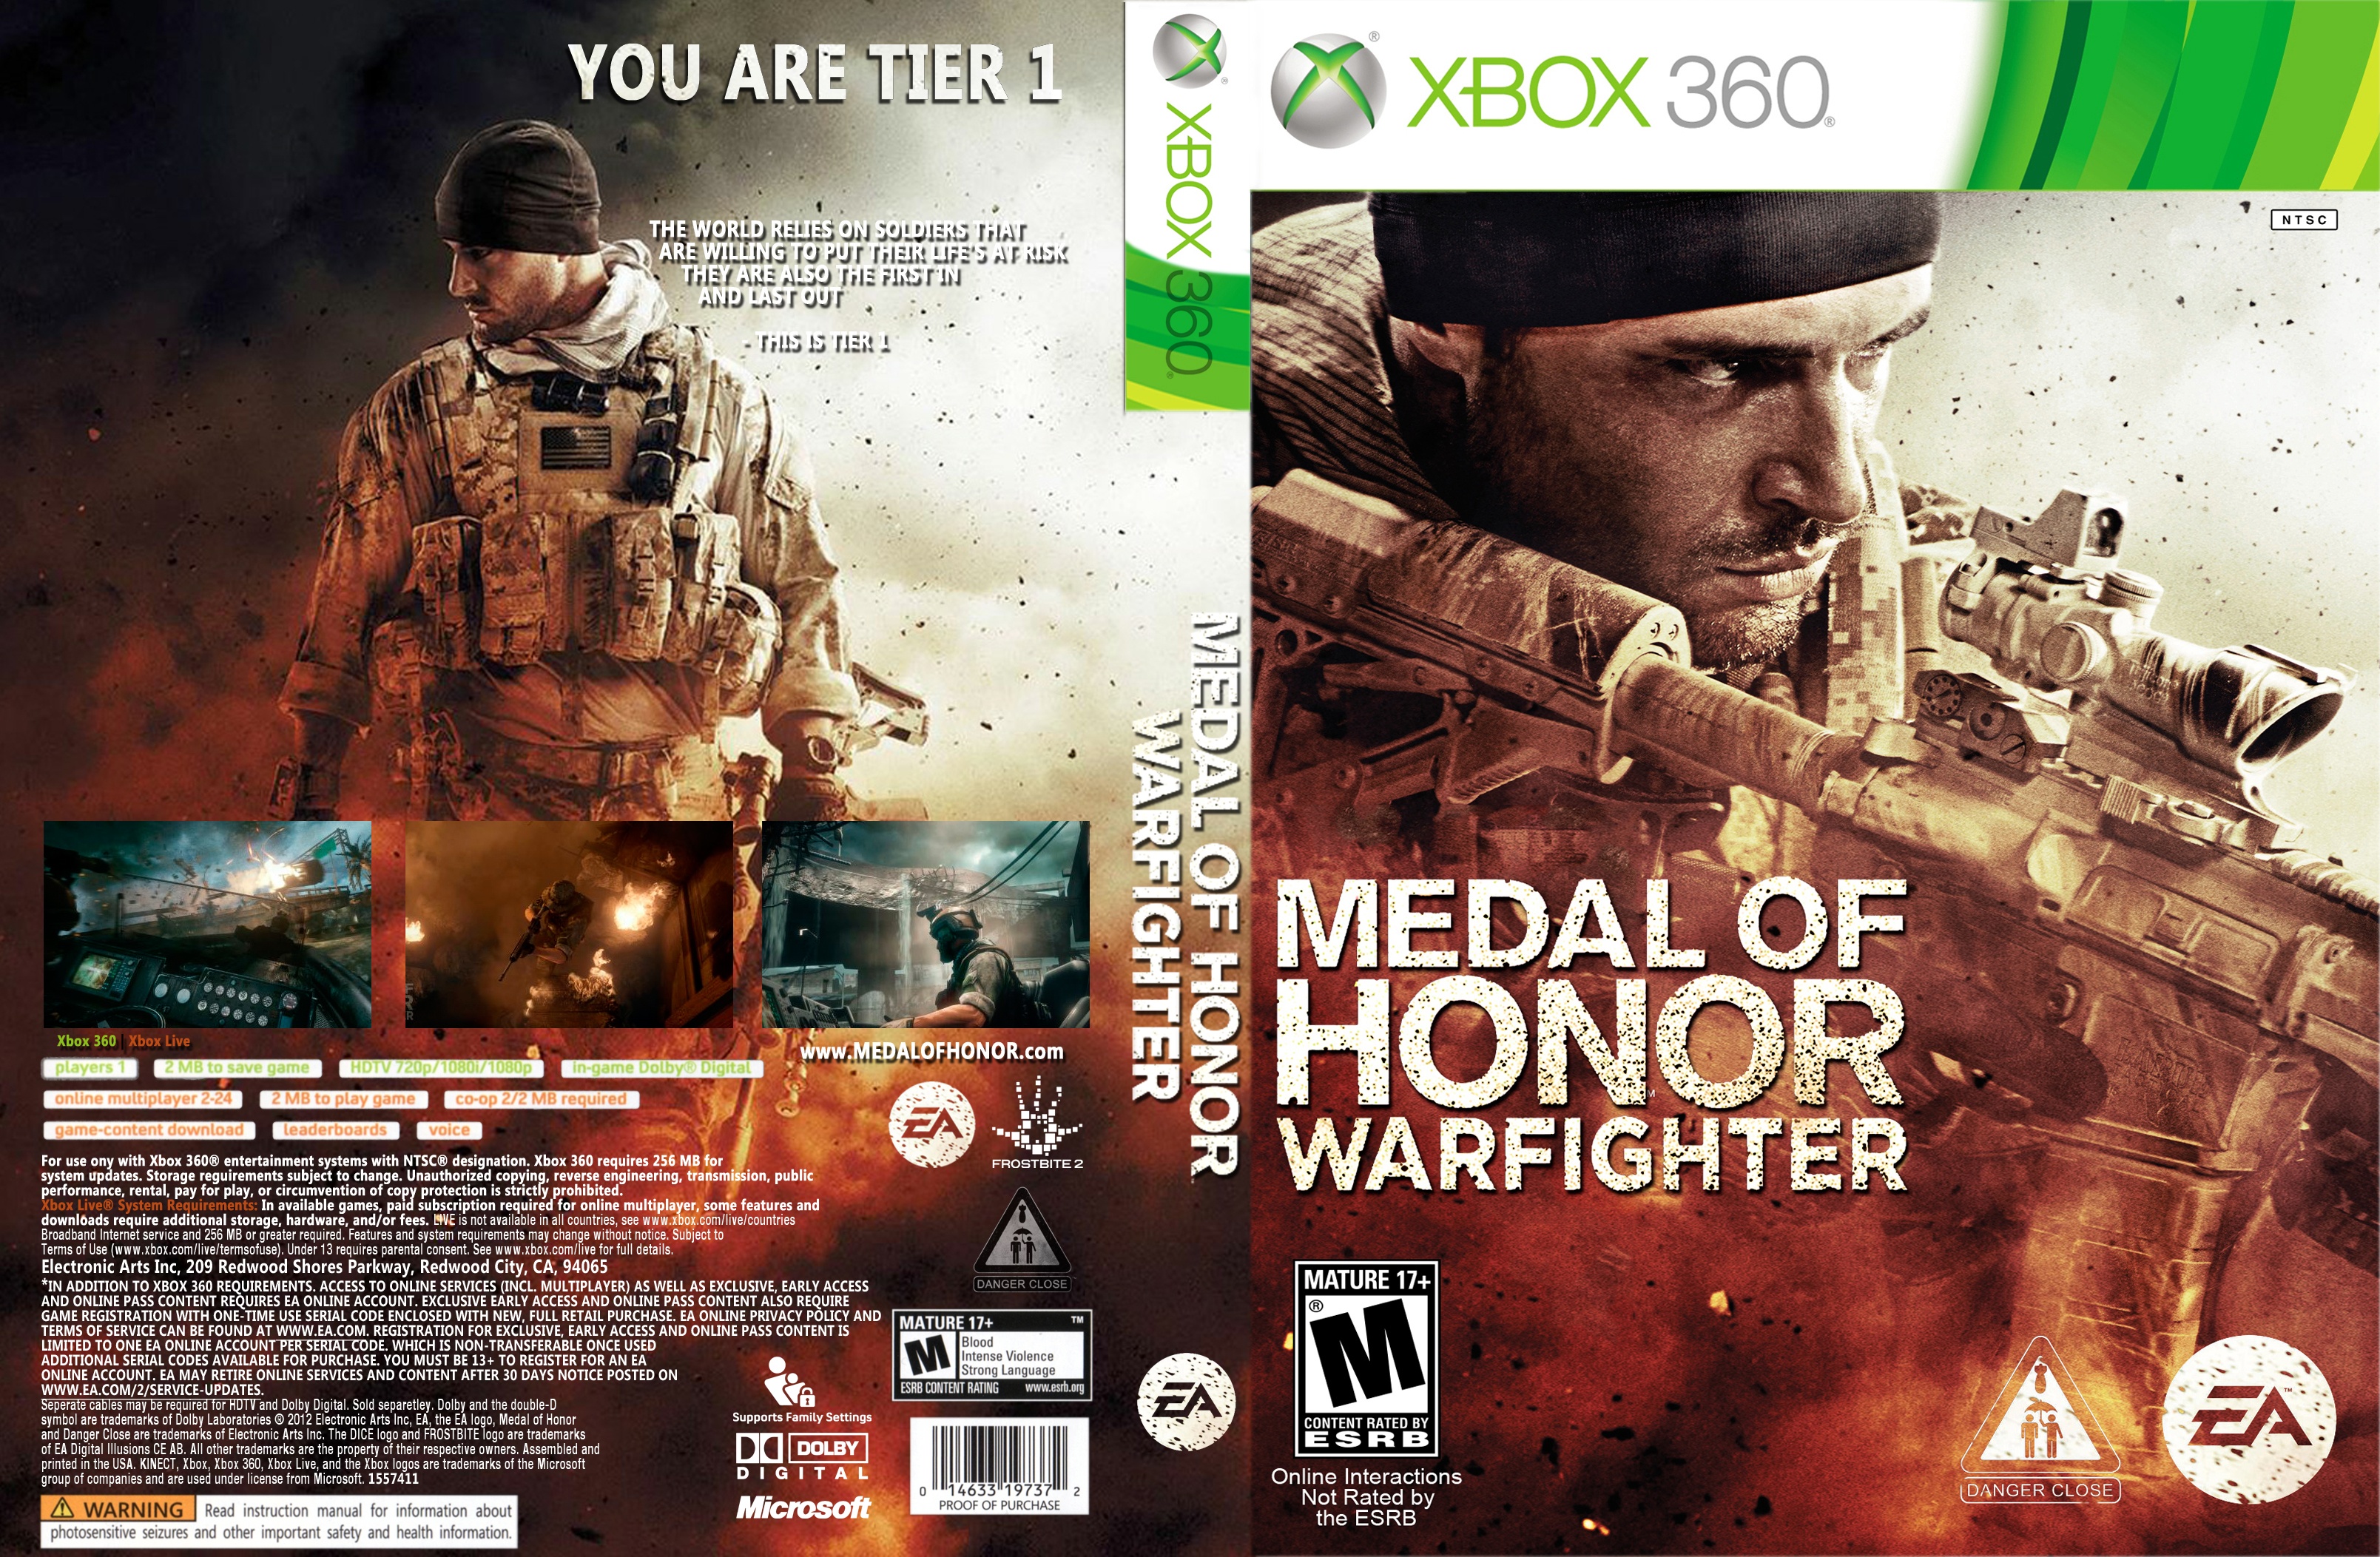 Medal of honor читы. Medal of Honor Warfighter Xbox 360. Medal of Honor Warfighter Xbox 360 Disk. Medal of Honor: Warfighter Xbox 360 обложка. Medal of Honor 2012.